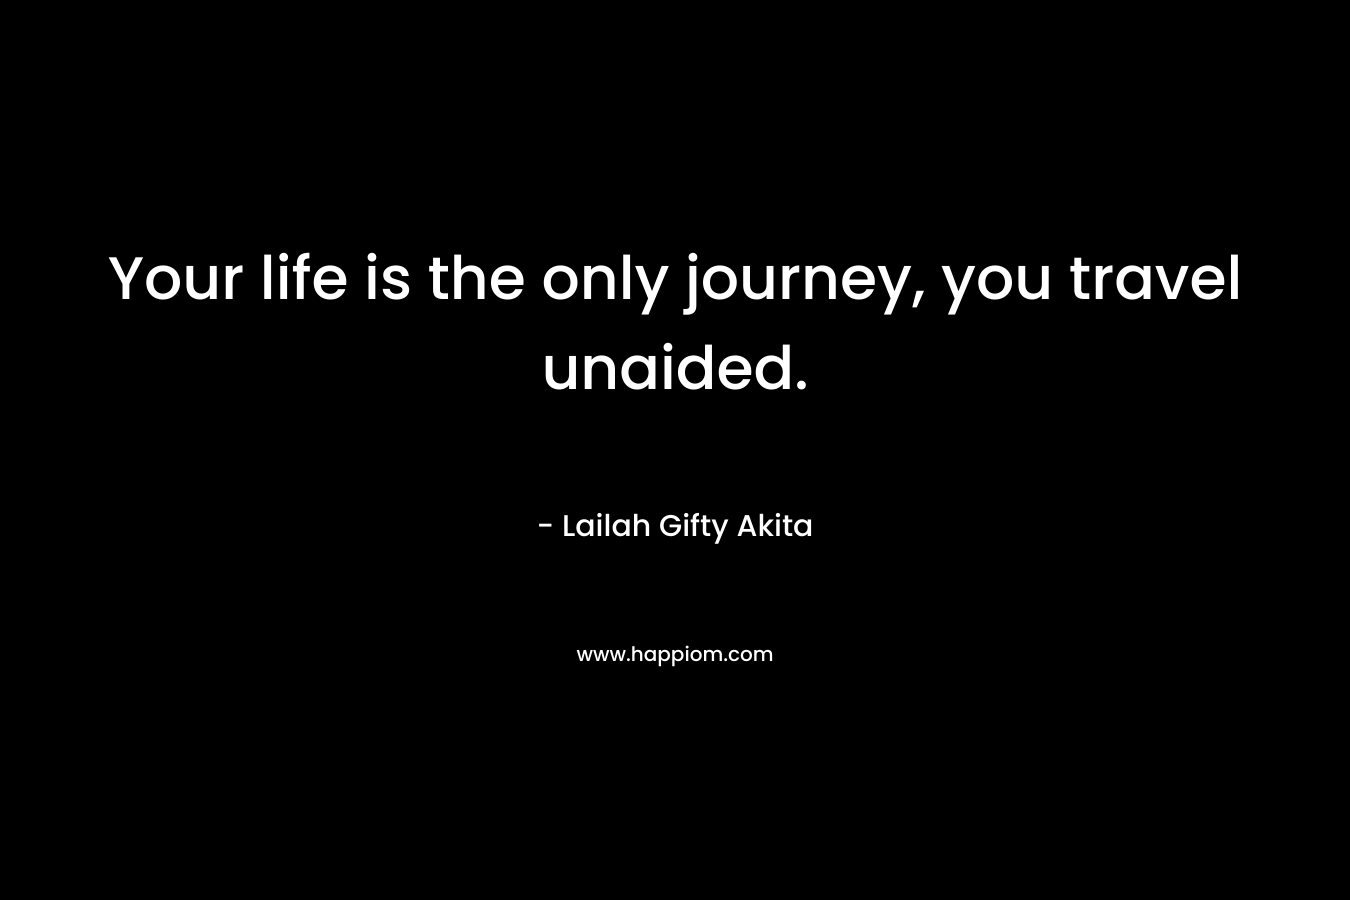 Your life is the only journey, you travel unaided.